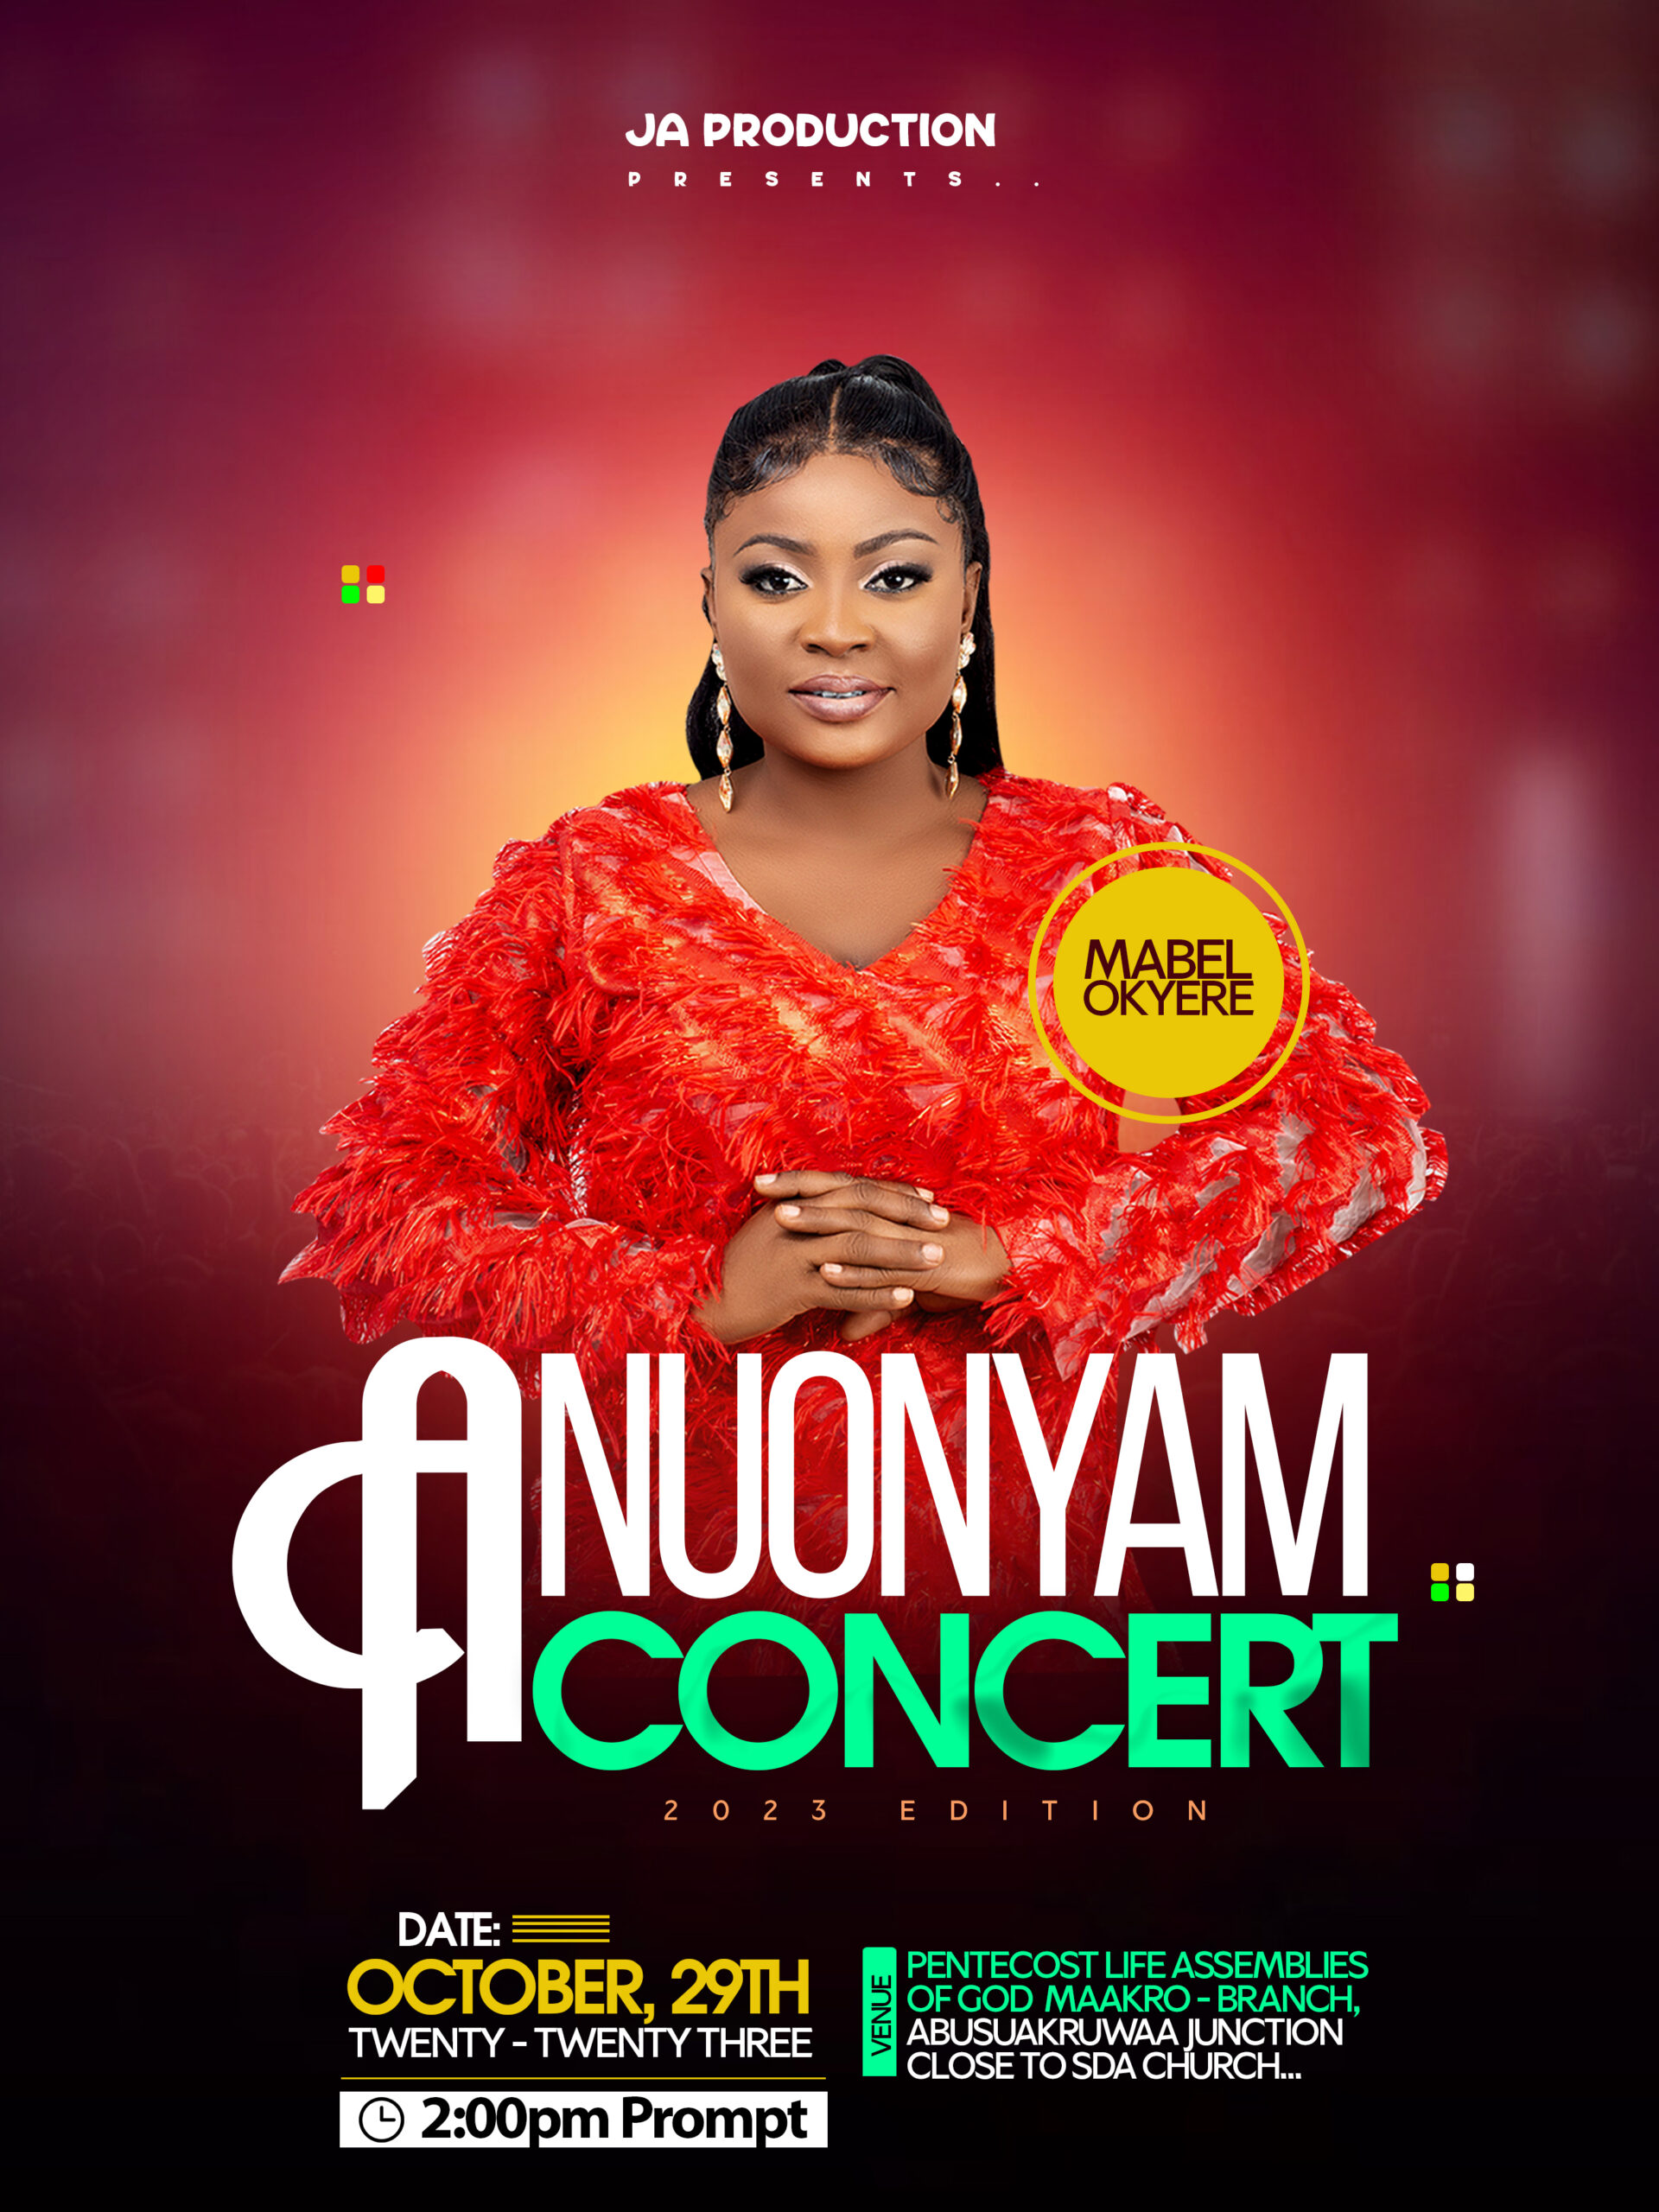 Mabel Okyere to celebrate 10th anniversary with ‘Anuonyam Concert’ slated for October 29